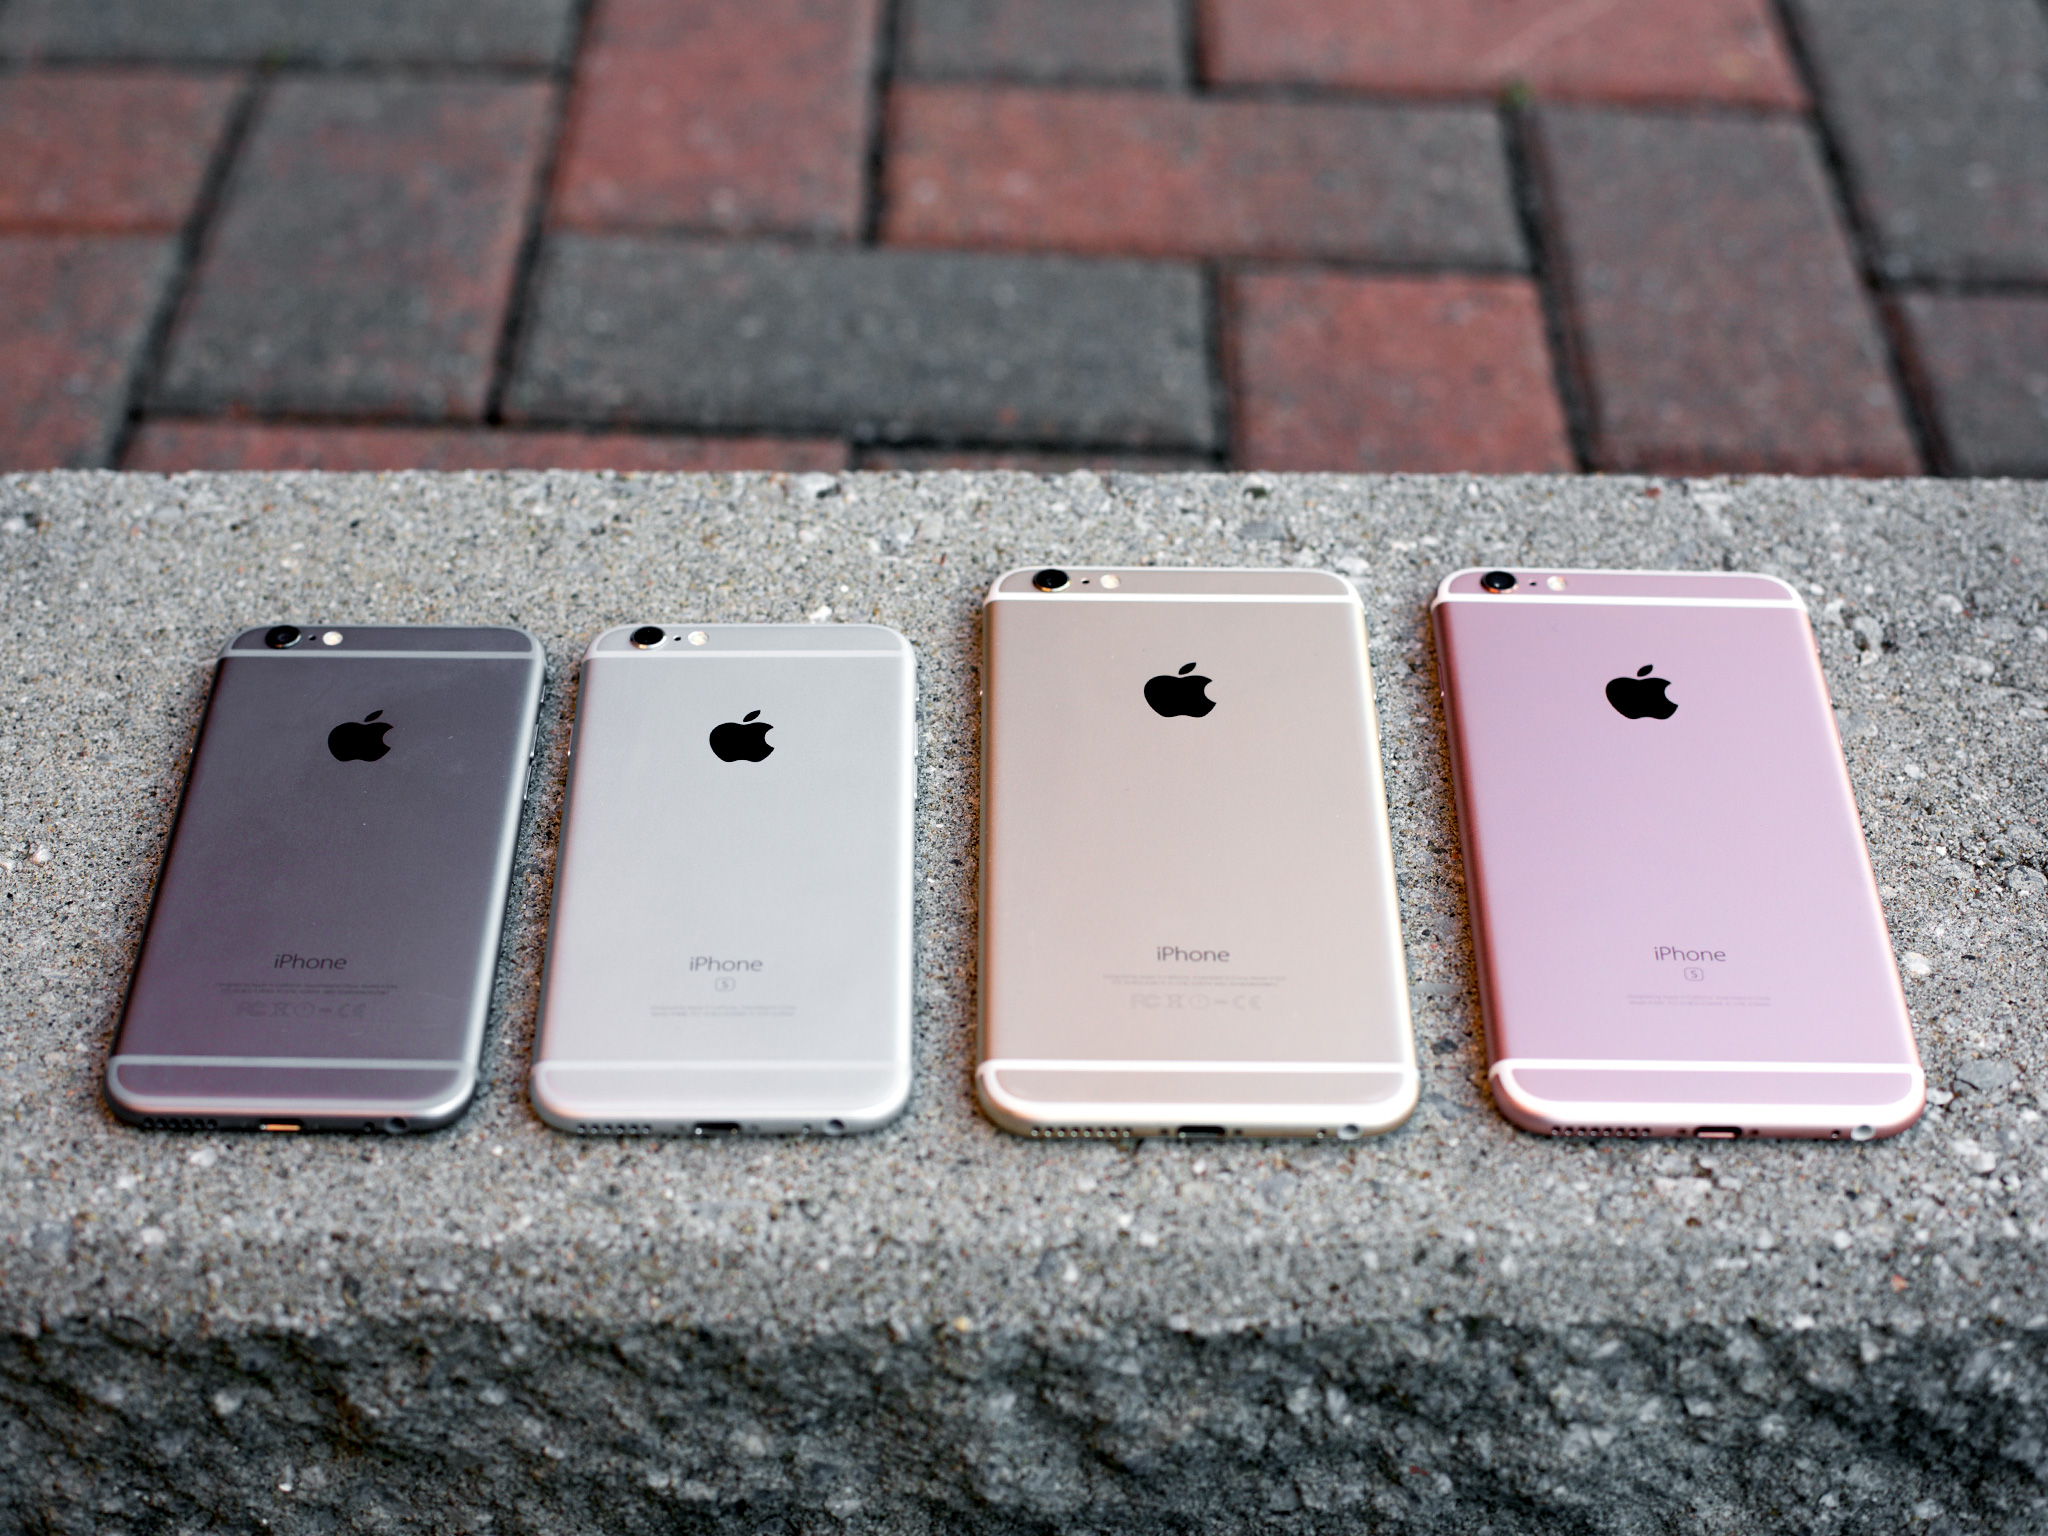 Iphone 6s Review Imore